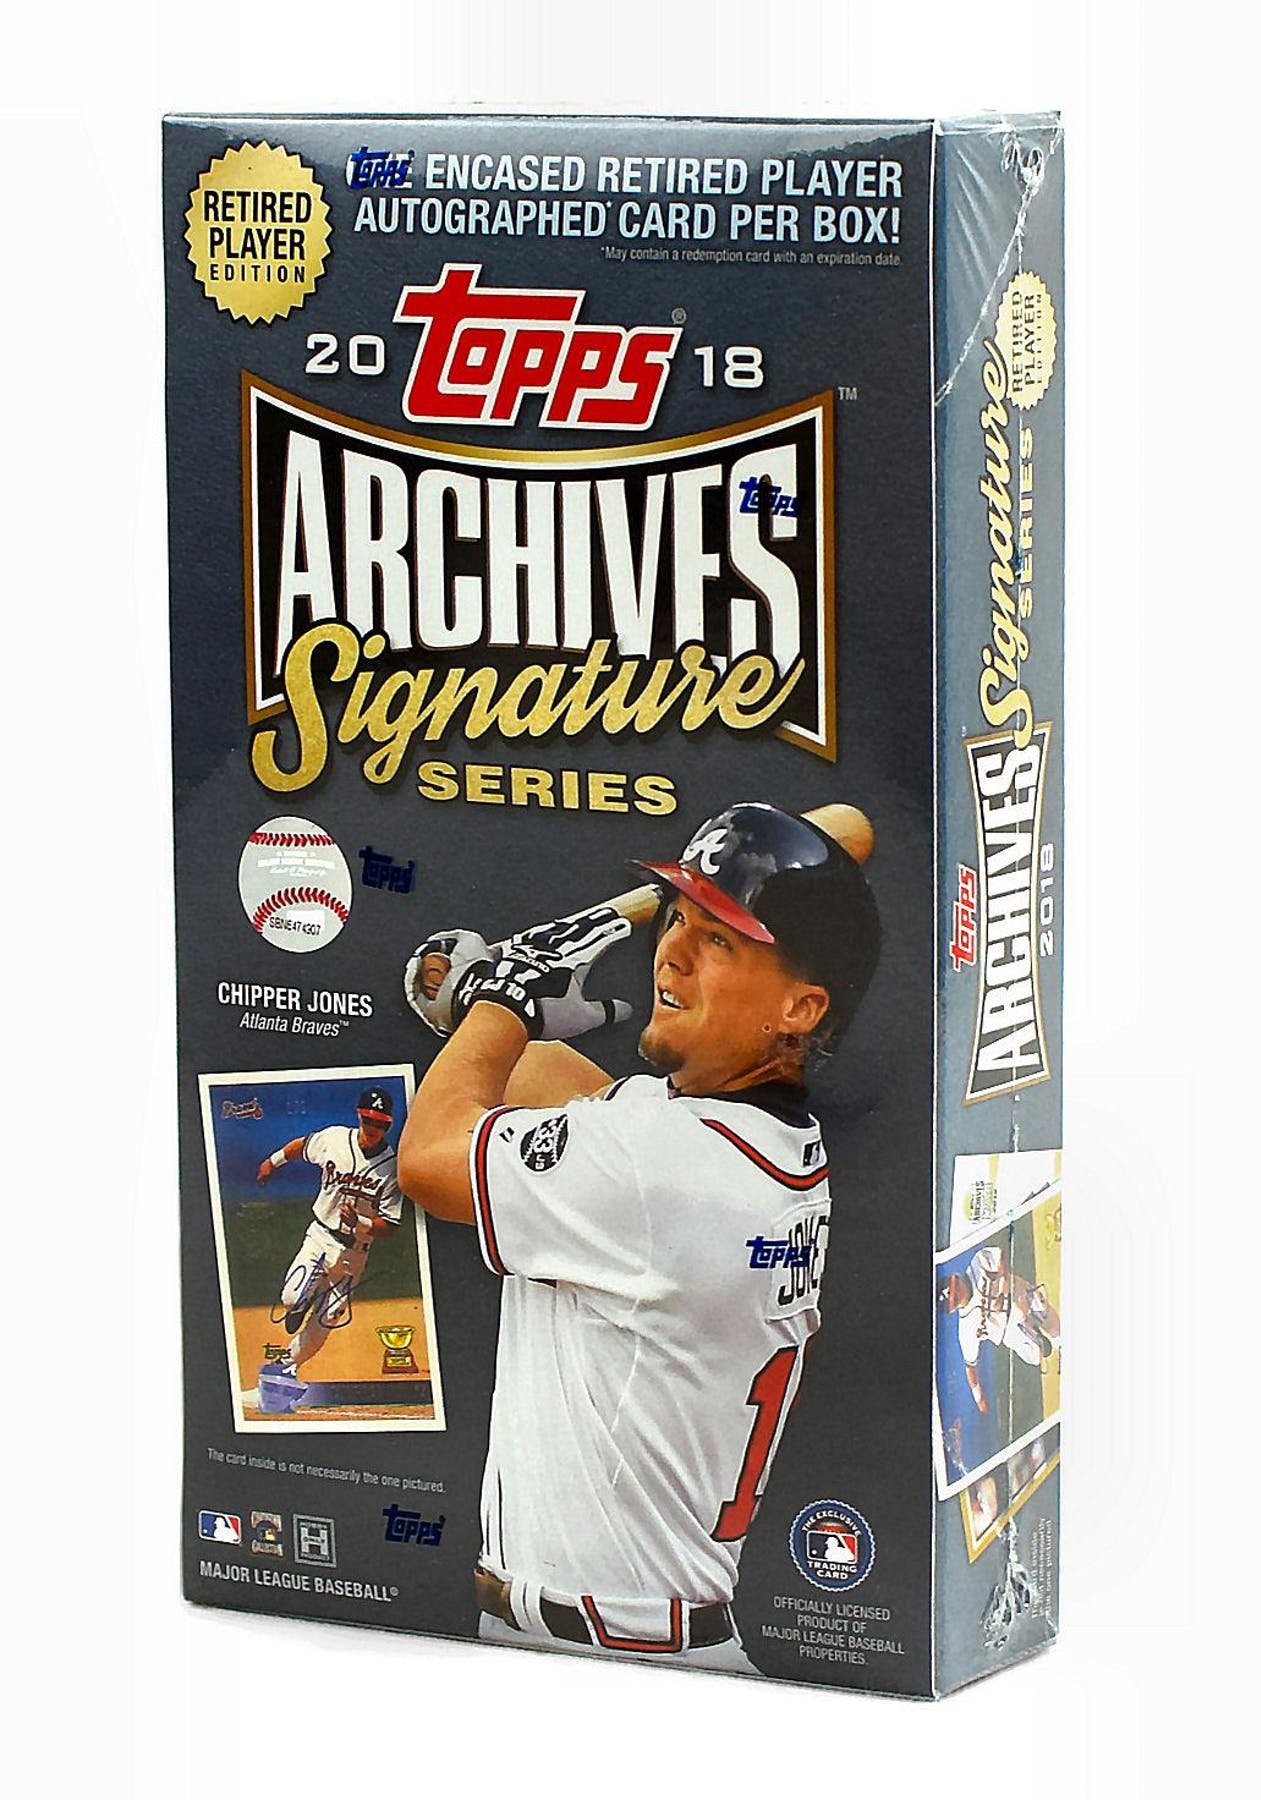 2018 Topps Archives Signature Series "Retired Player Edition" Baseball Hobby Box - BigBoi Cards